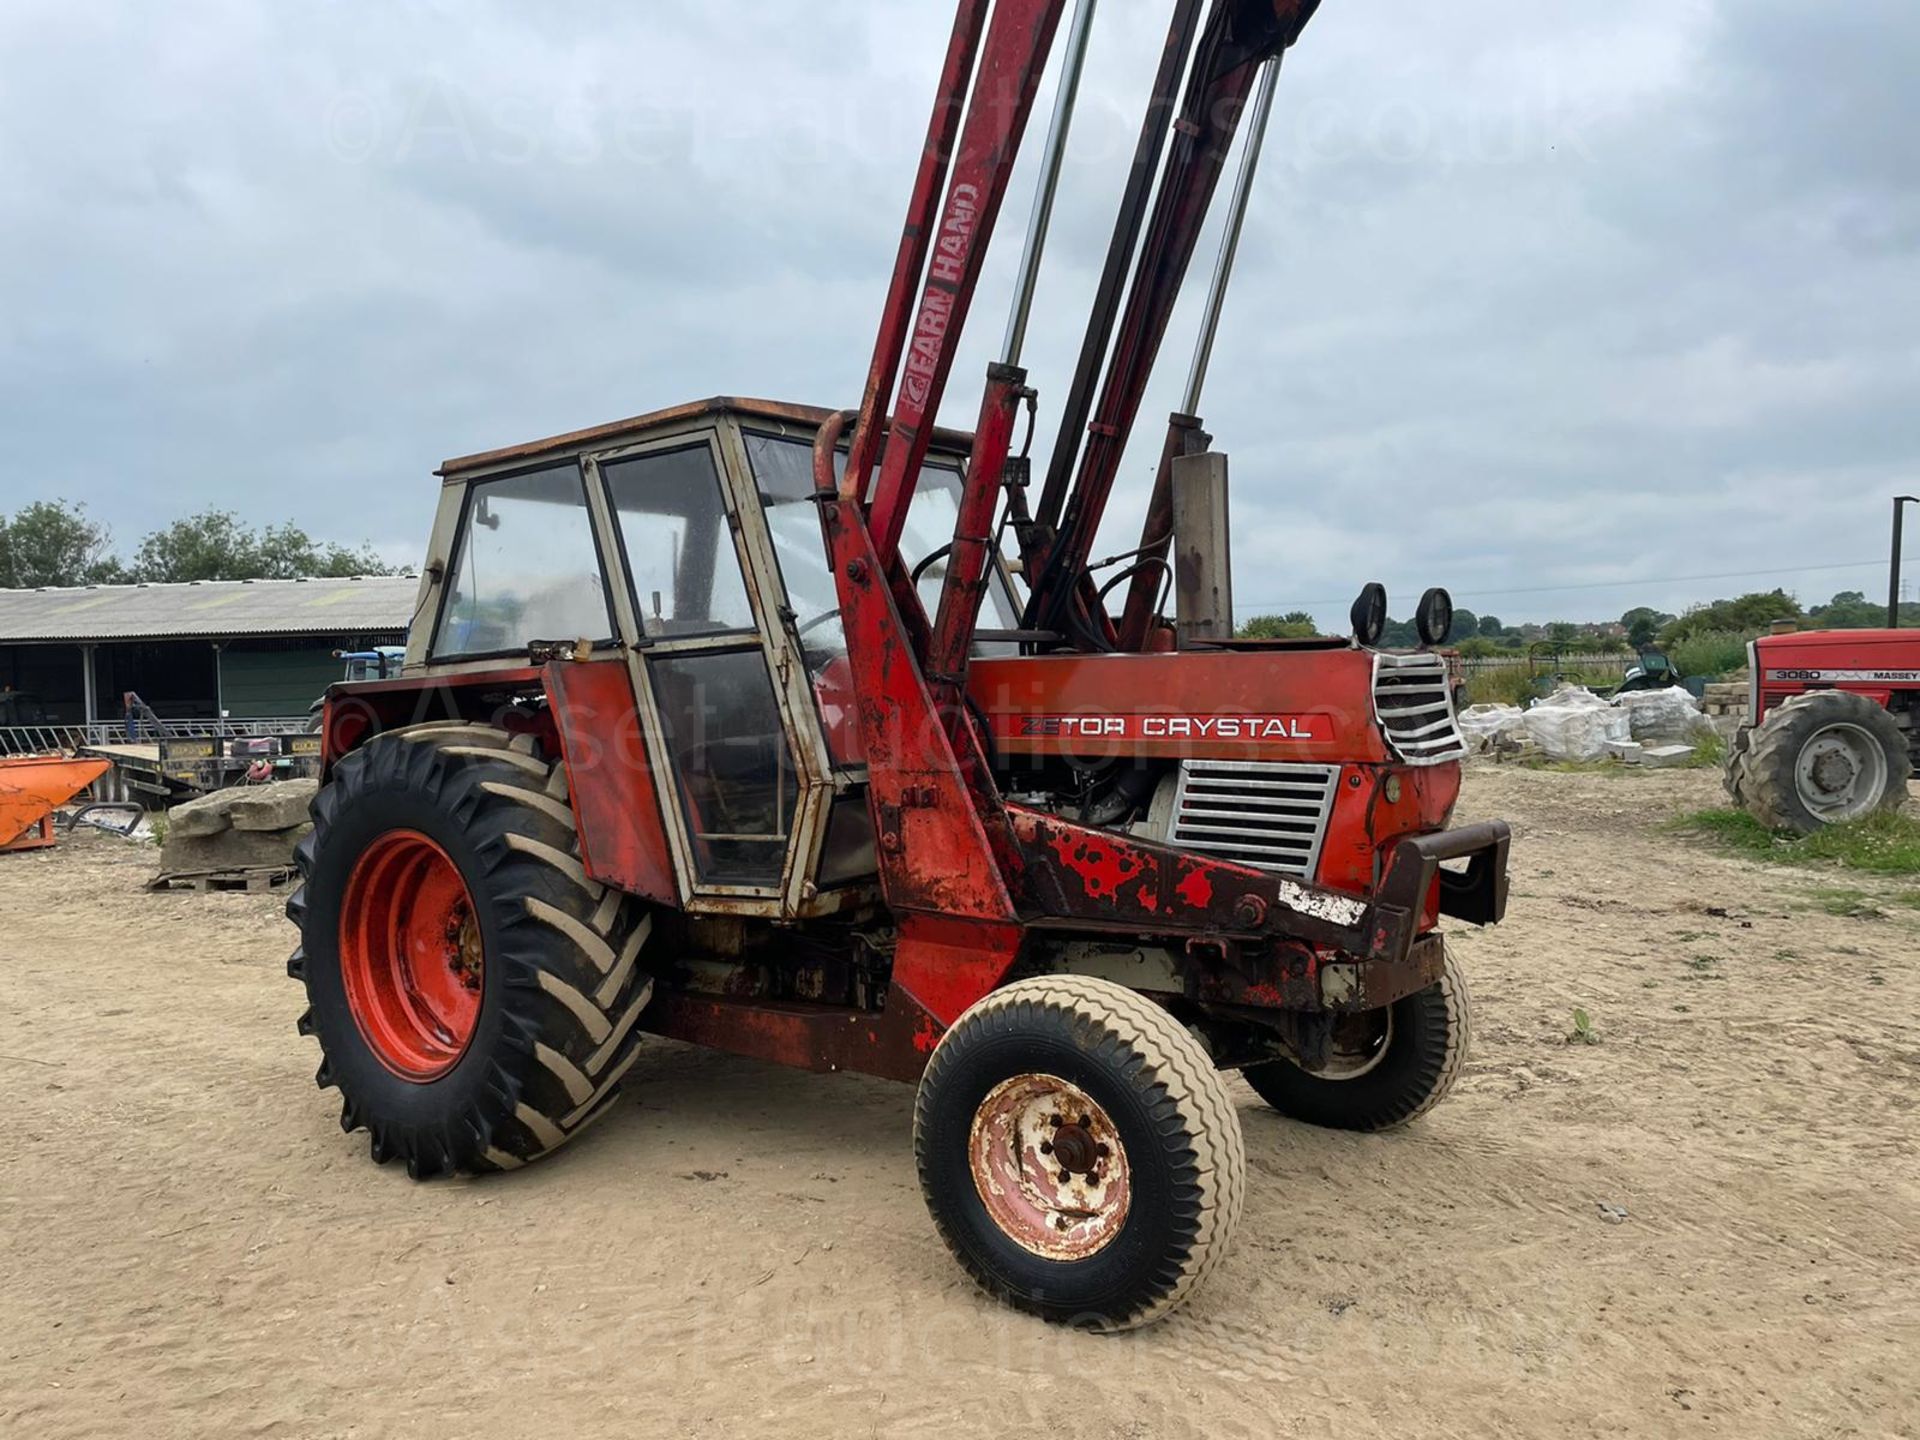 ZETOR CRYSTAL 8011 LOADER TRACTOR WITH FRONT LOADER, BALE SPIKE AND REAR WEIGHT, CABBED *PLUS VAT* - Image 2 of 10